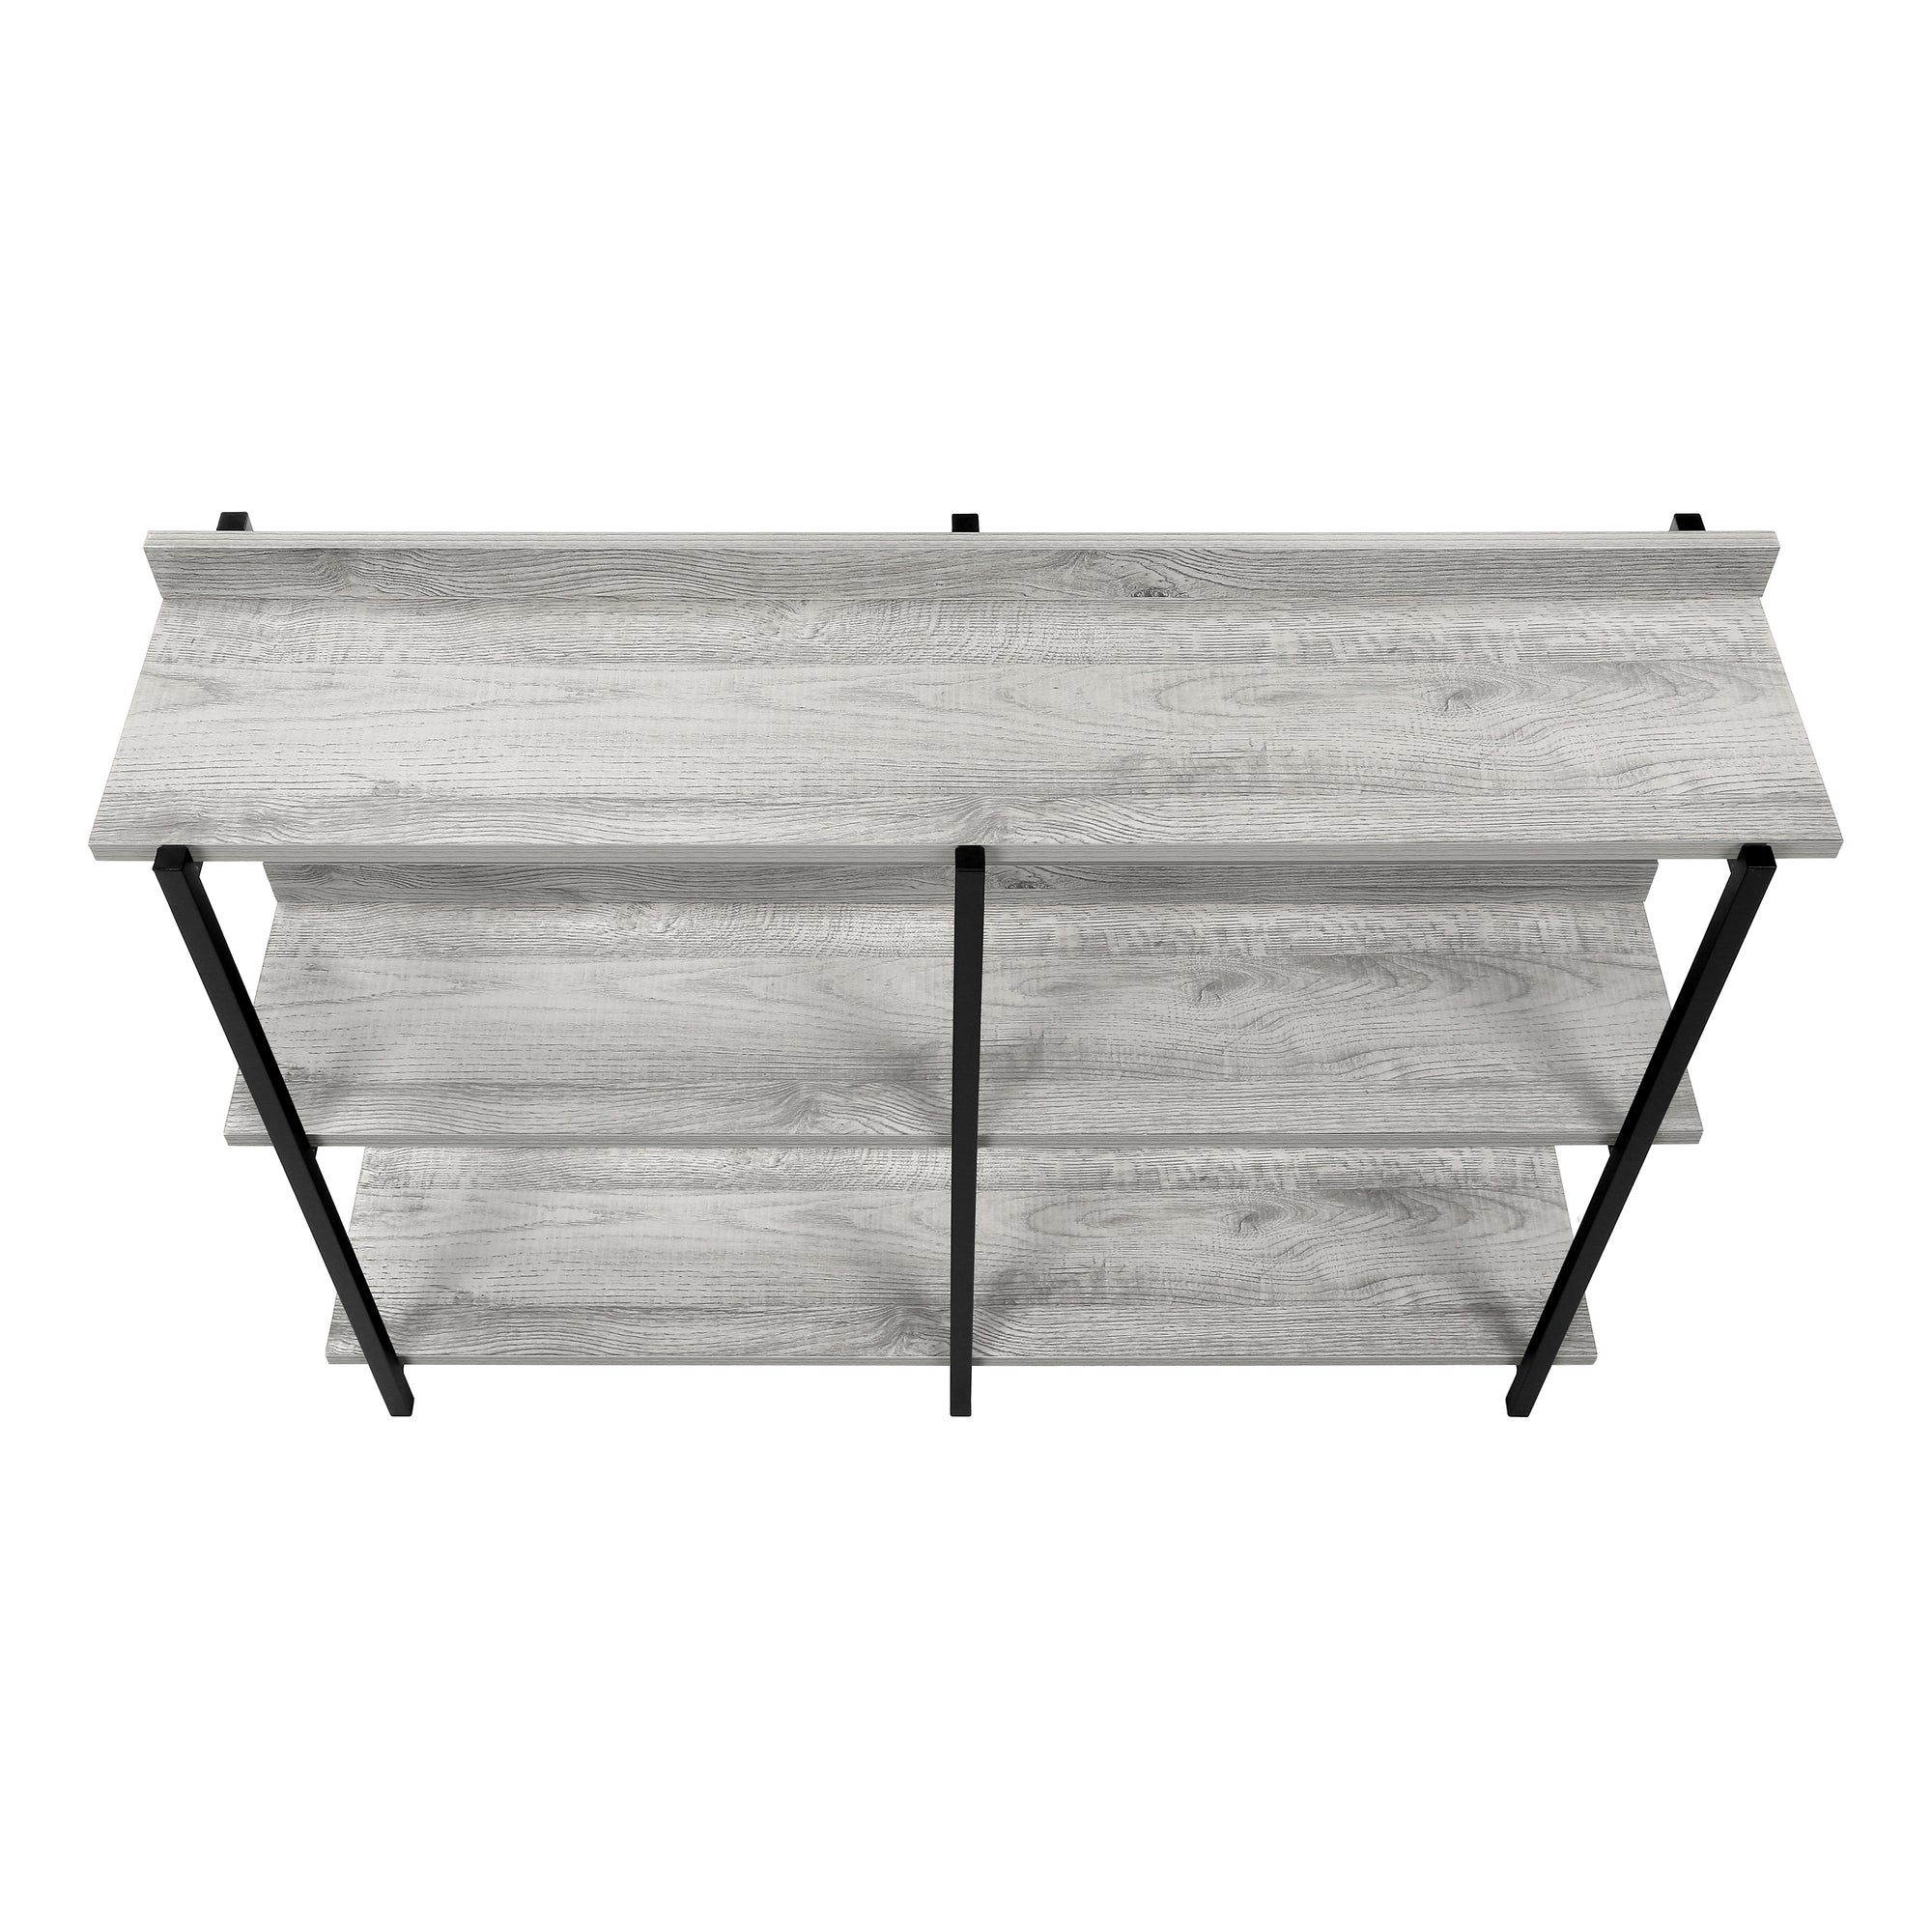 MN-552217    Accent Table, Console, Entryway, Narrow, Sofa, Living Room, Bedroom, Metal Legs, Laminate, Grey, Black, Contemporary, Modern